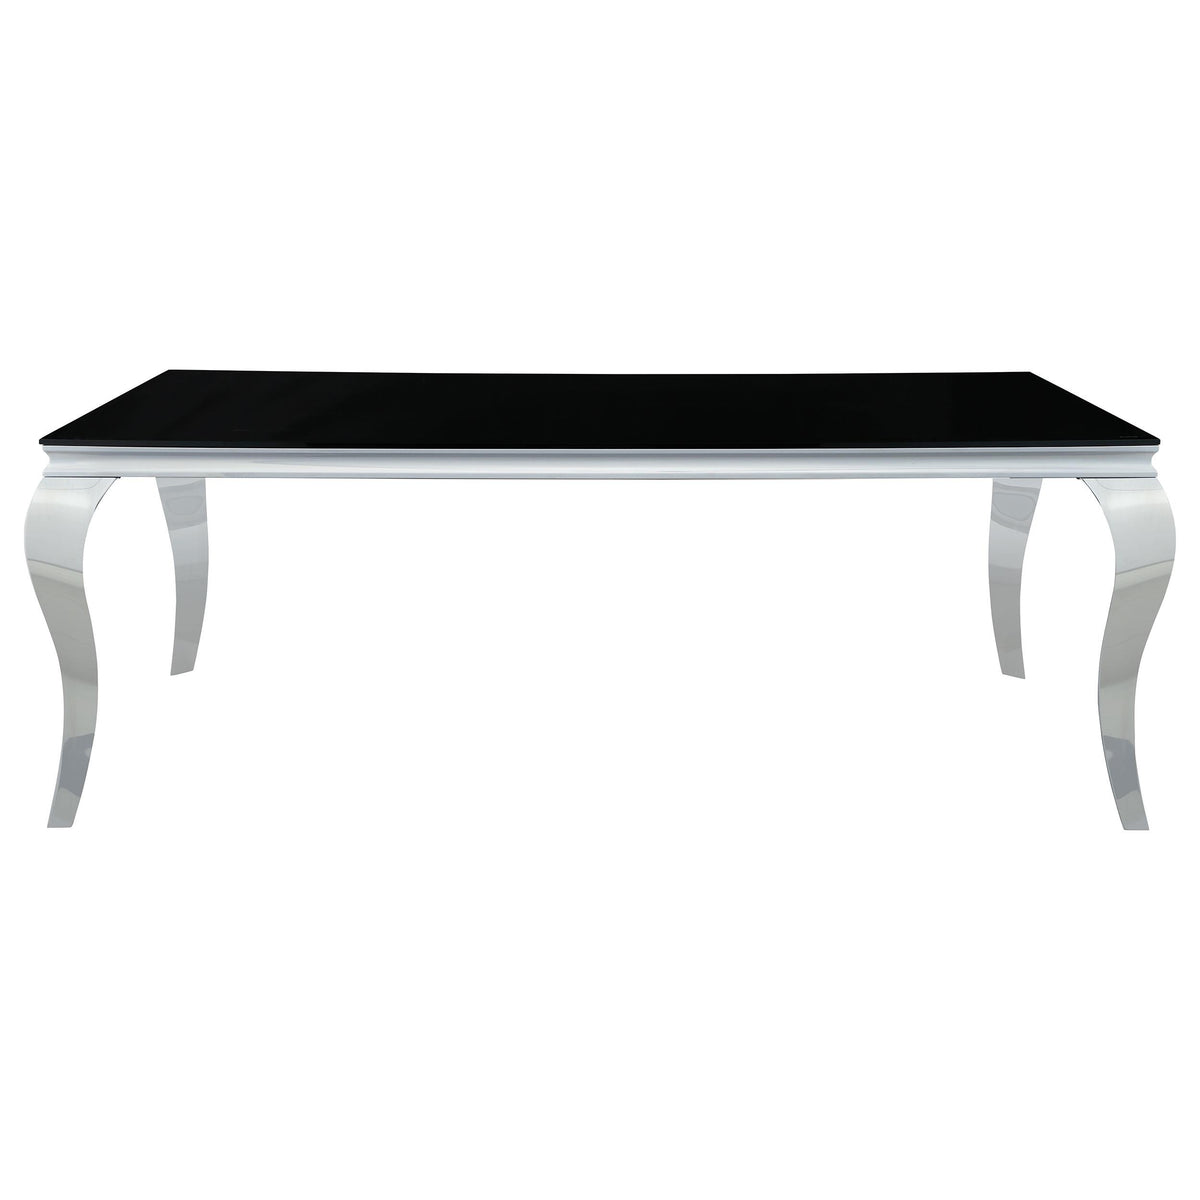 Carone Rectangular Glass Top Dining Table Black and Chrome  Las Vegas Furniture Stores